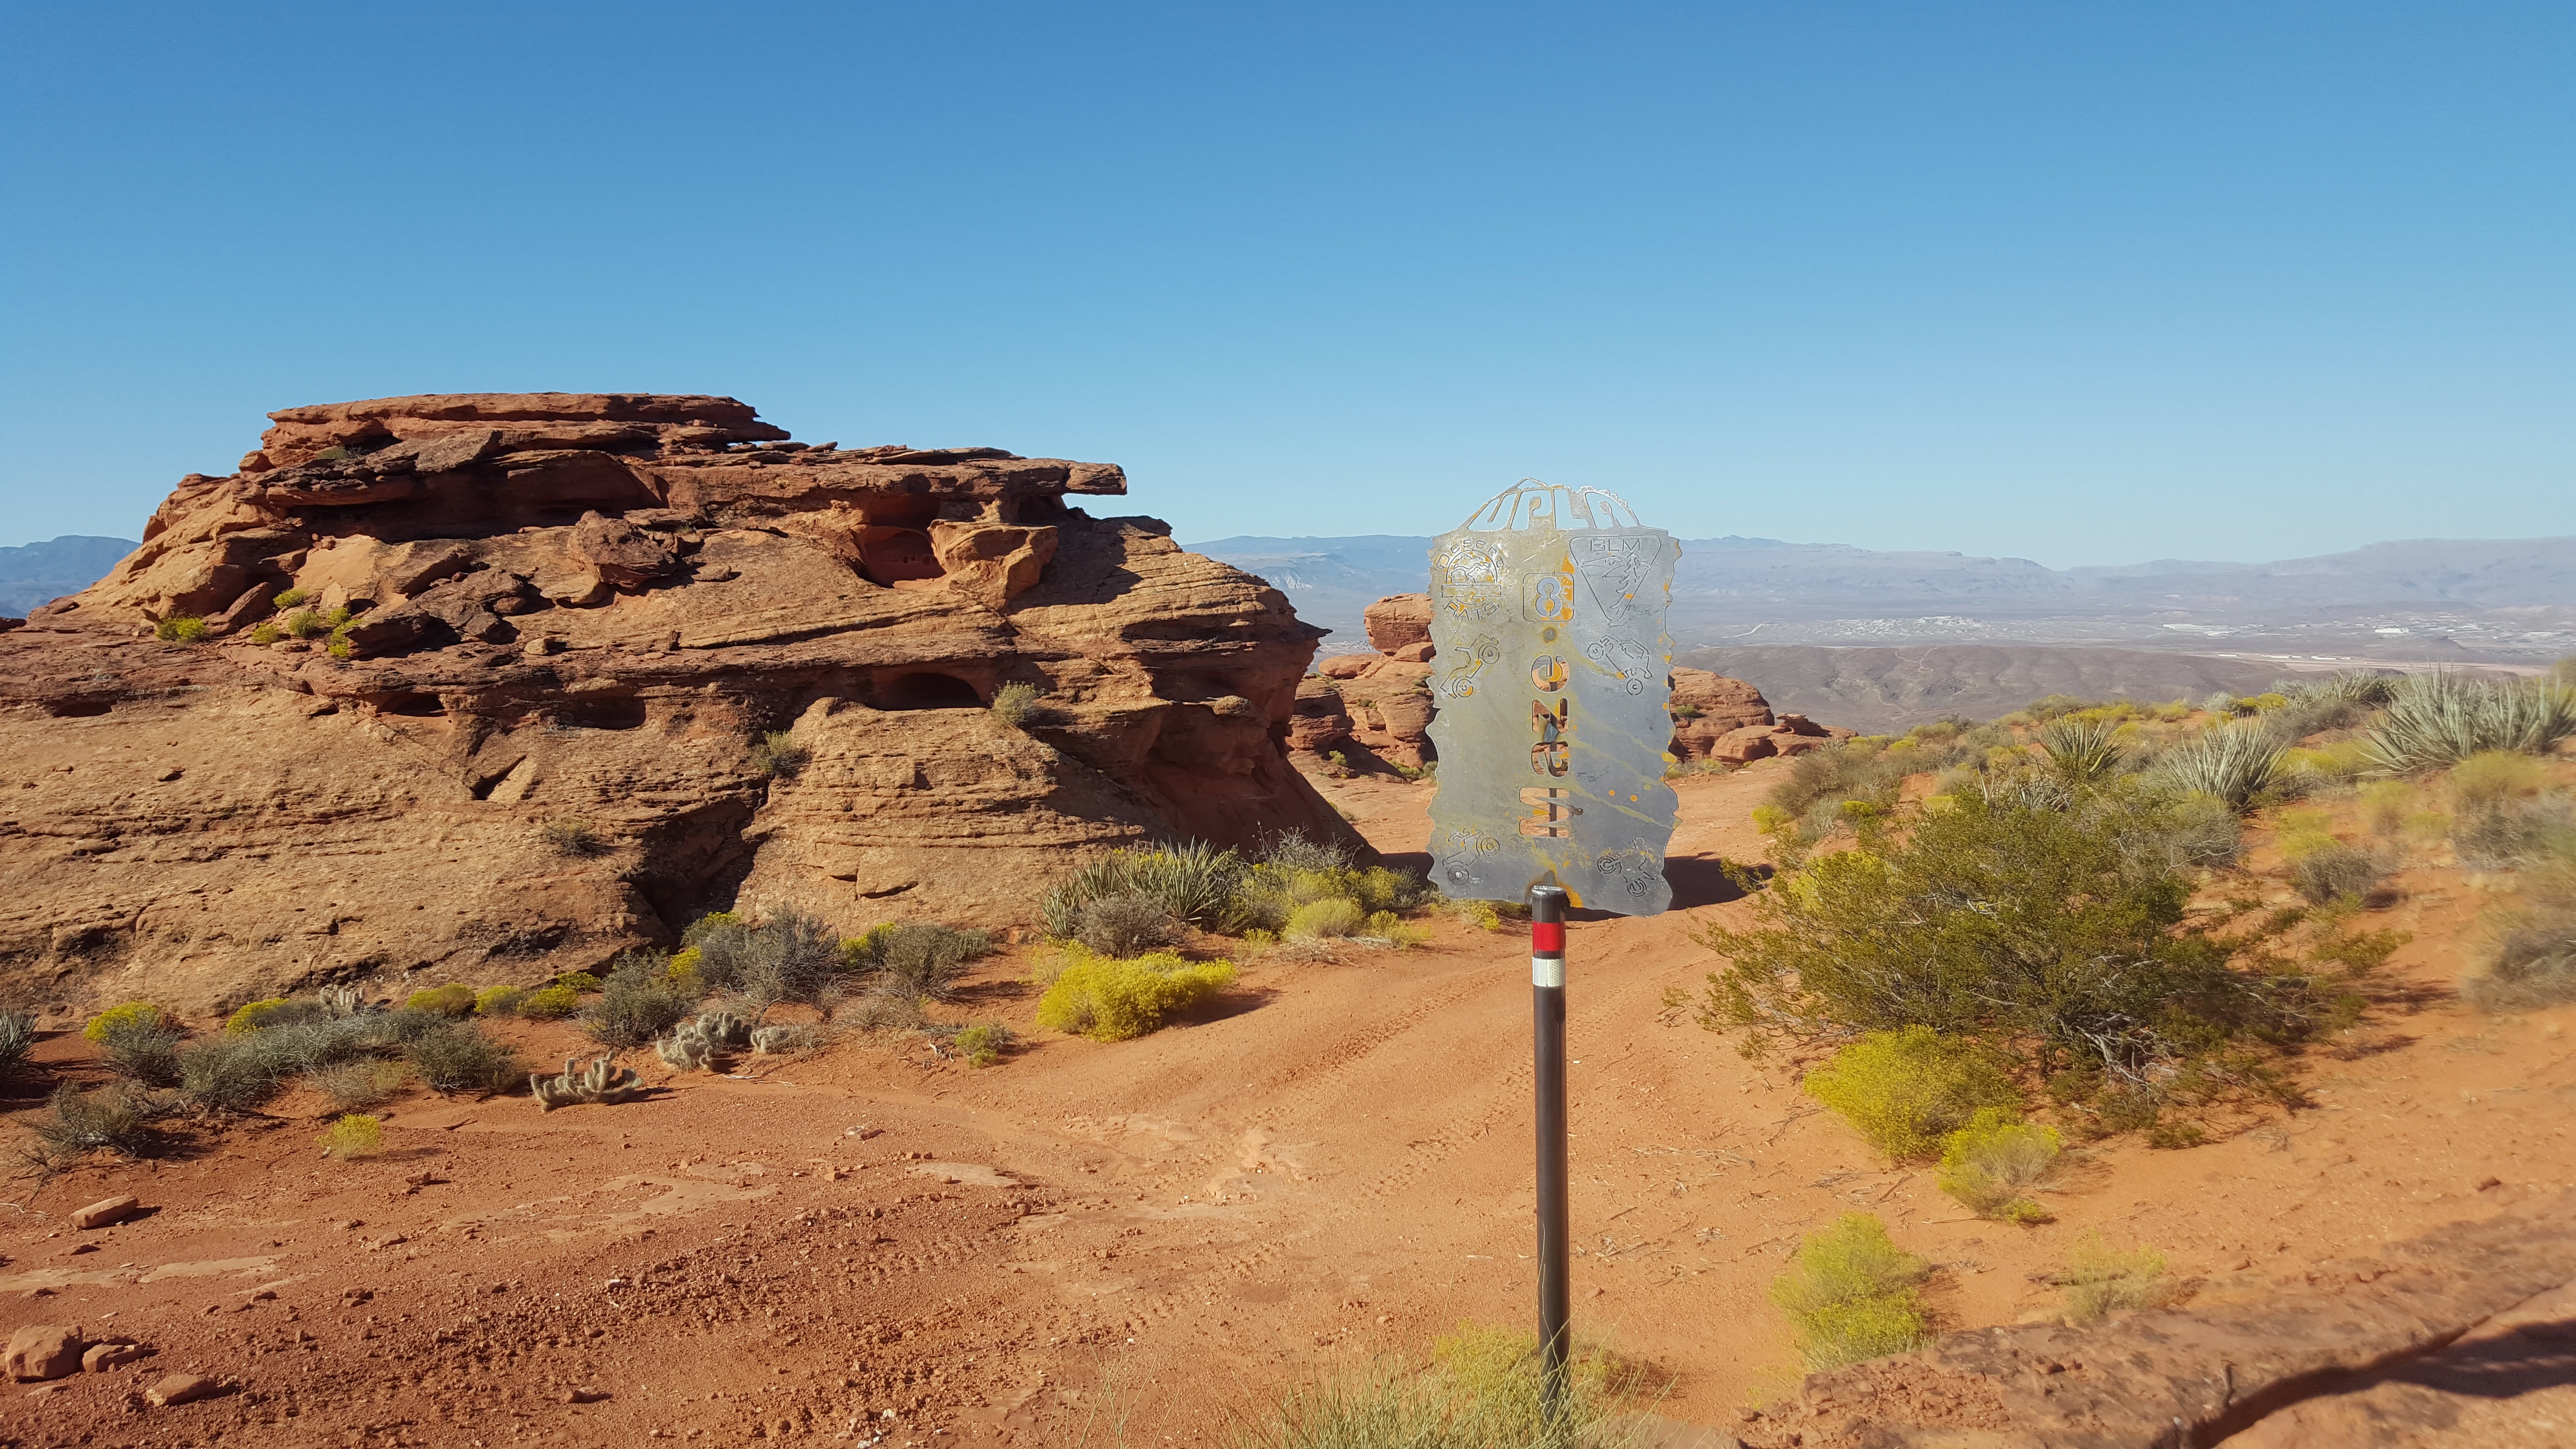 This project will develop and install permanent trail signs for the popular trails in Sand Mountain. This project is financed by Recreation Permit Funds from the BLM.